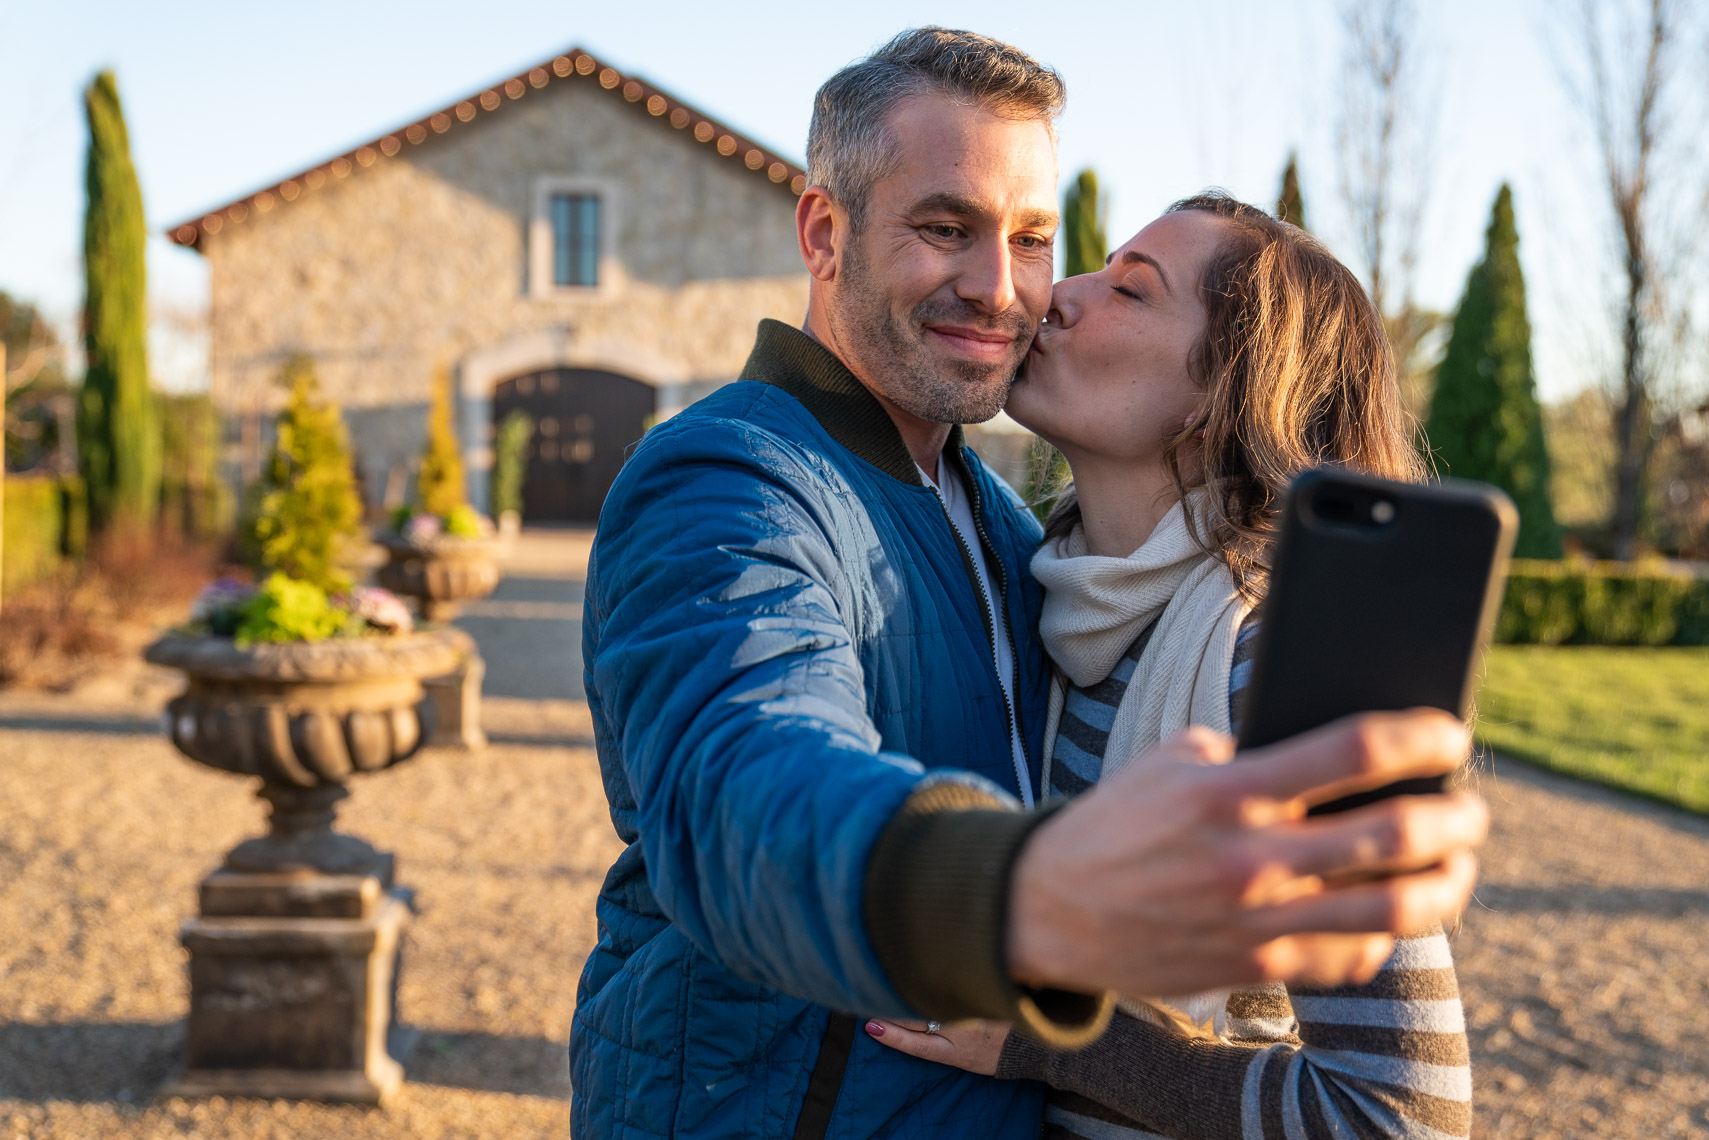 Avast - Couple Taking Selfie With Smartphone At Napa Valley Vineyard